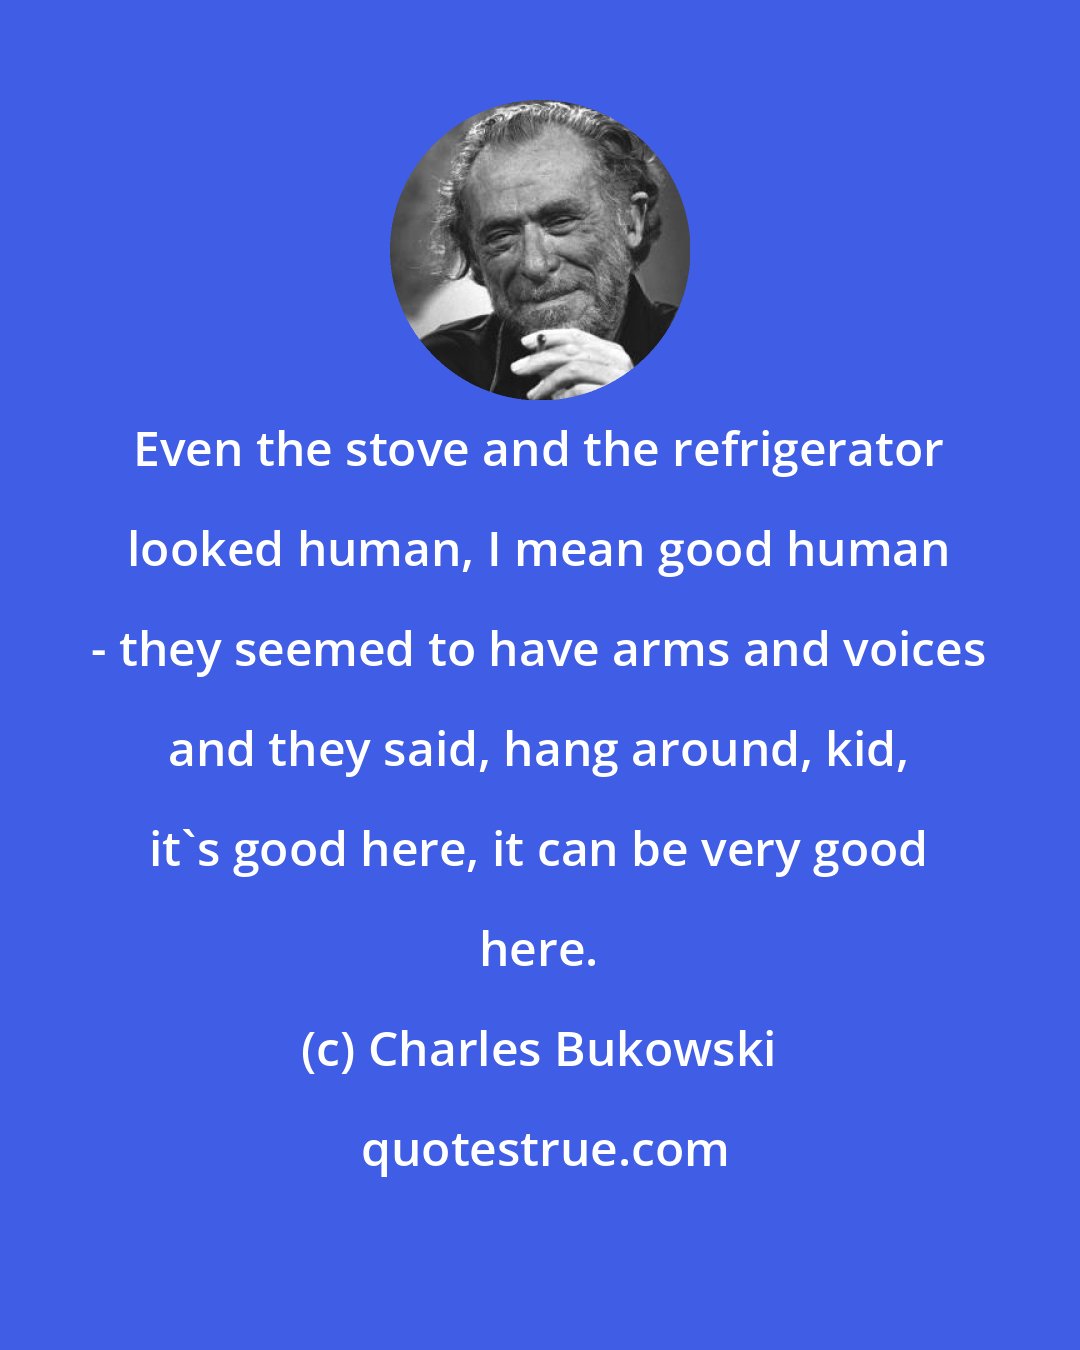 Charles Bukowski: Even the stove and the refrigerator looked human, I mean good human - they seemed to have arms and voices and they said, hang around, kid, it's good here, it can be very good here.